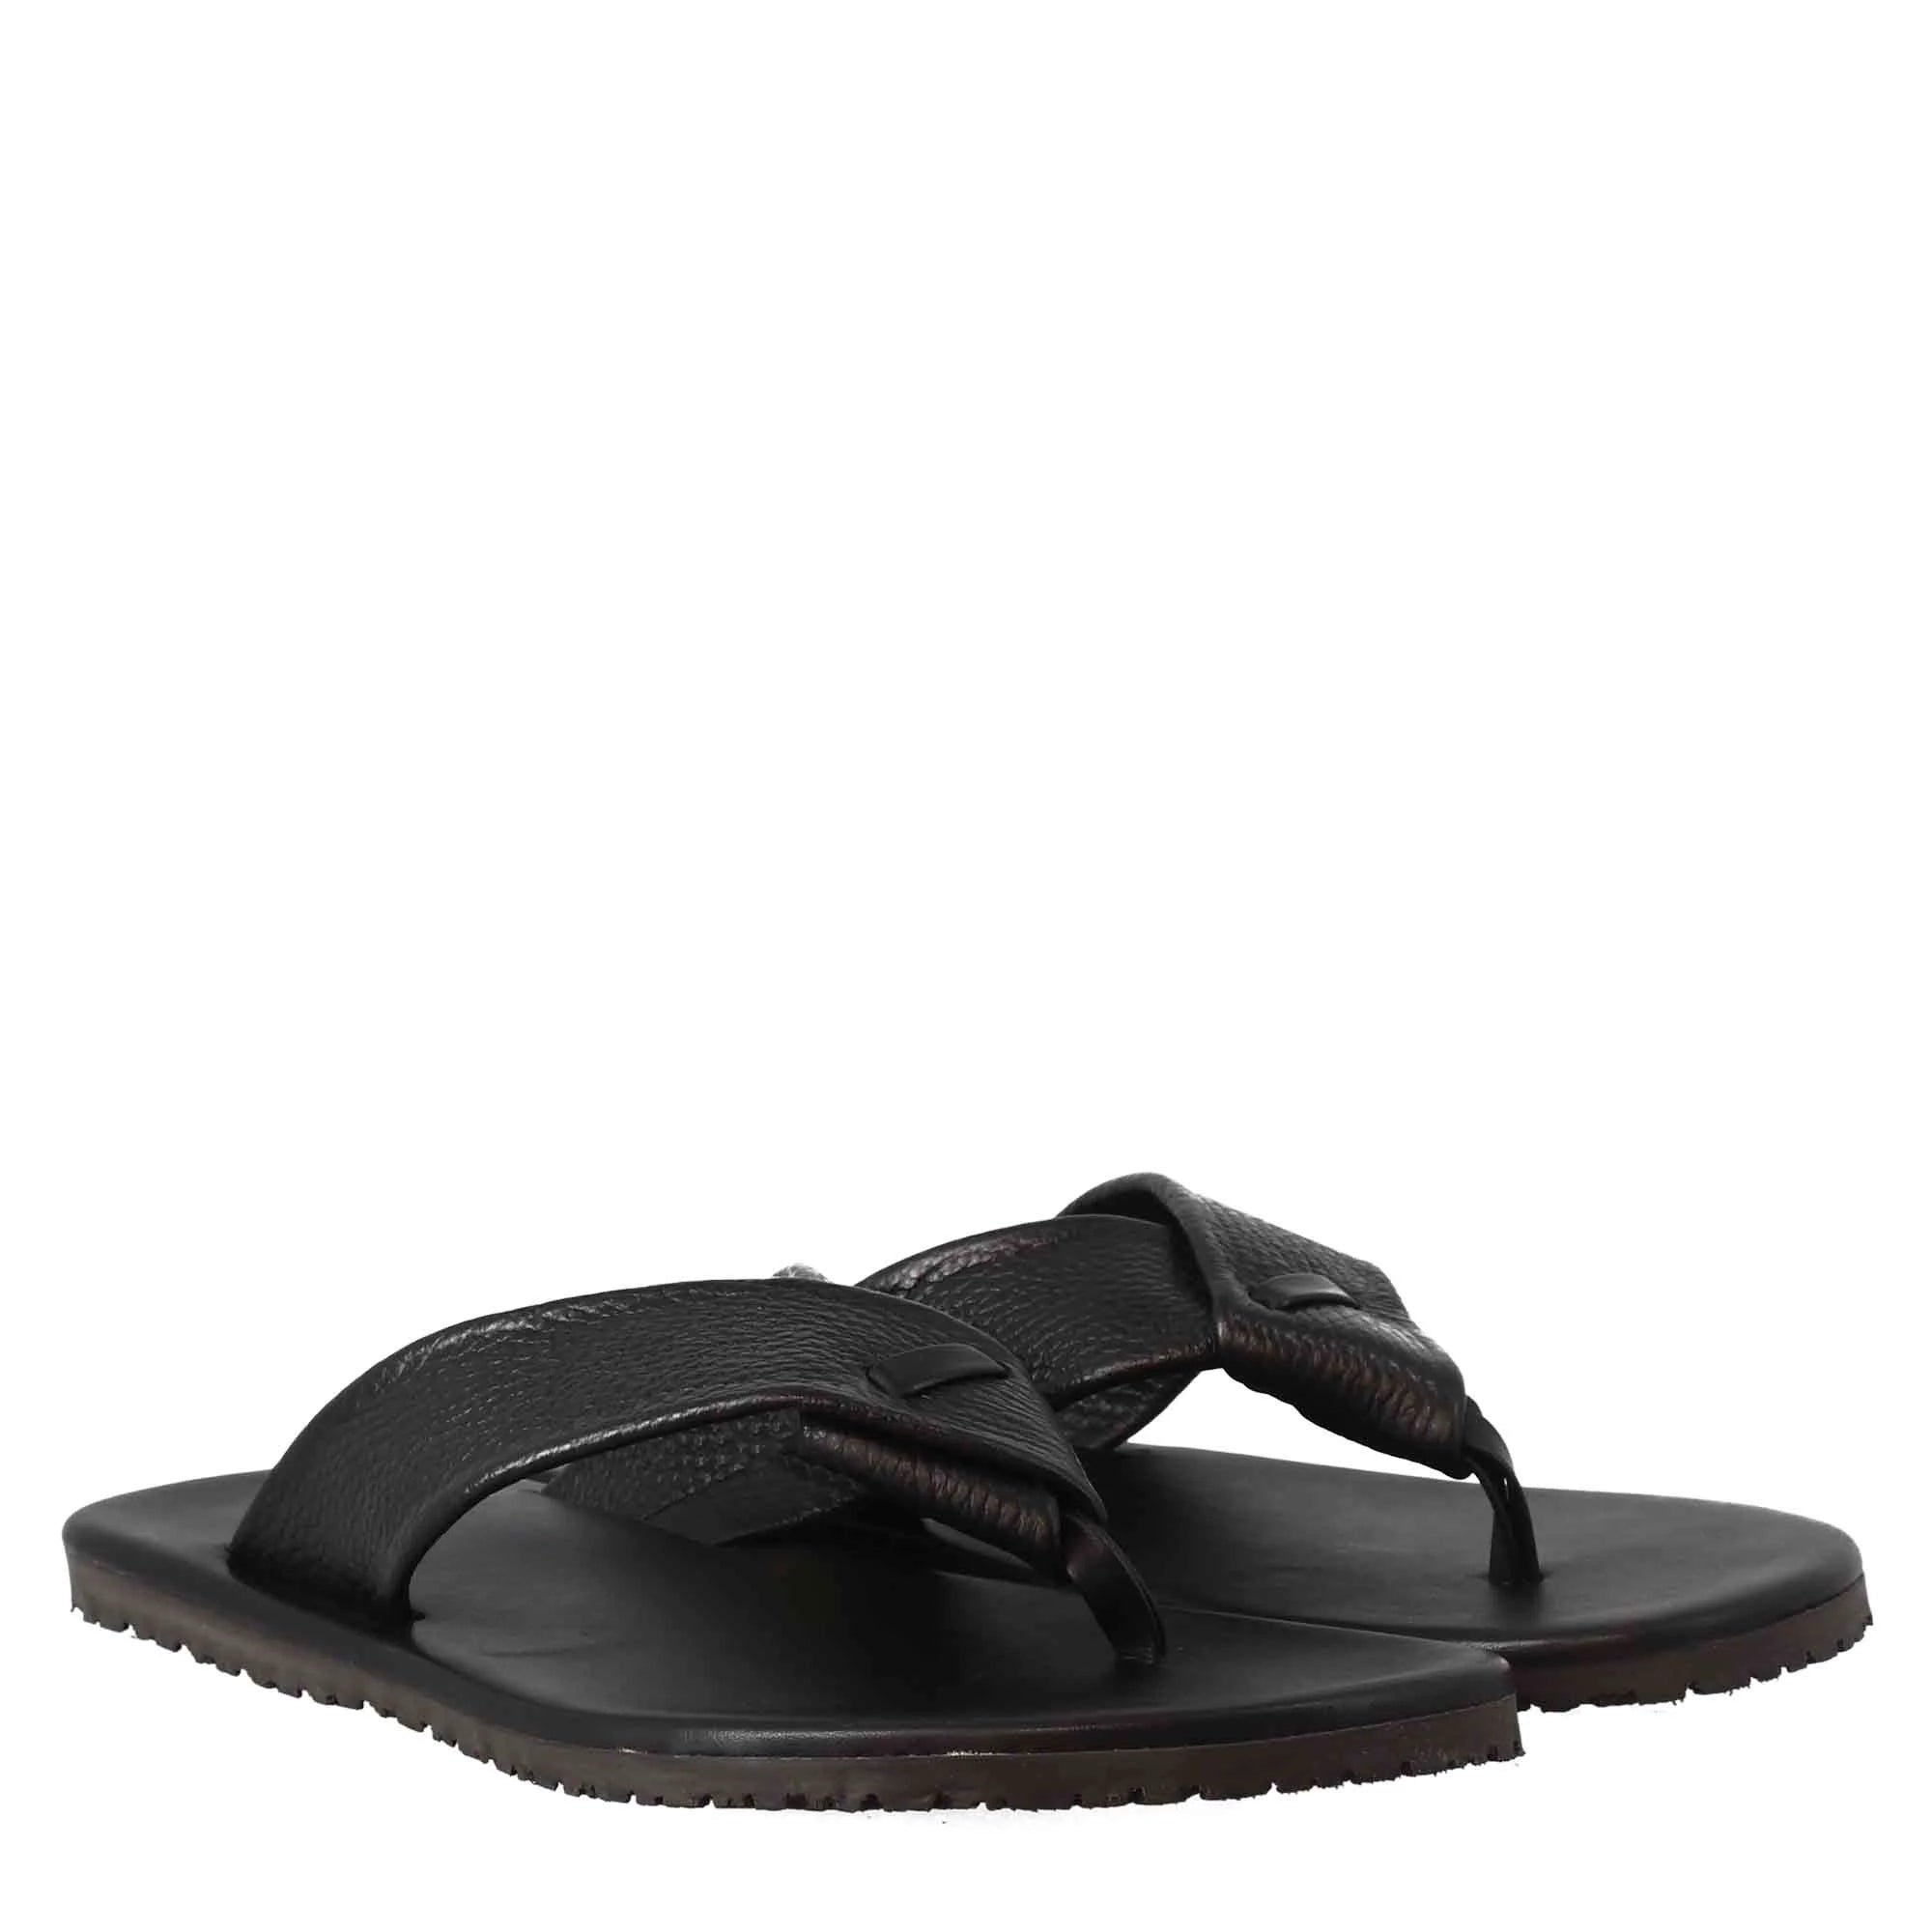 Black Leather Thong Sandals